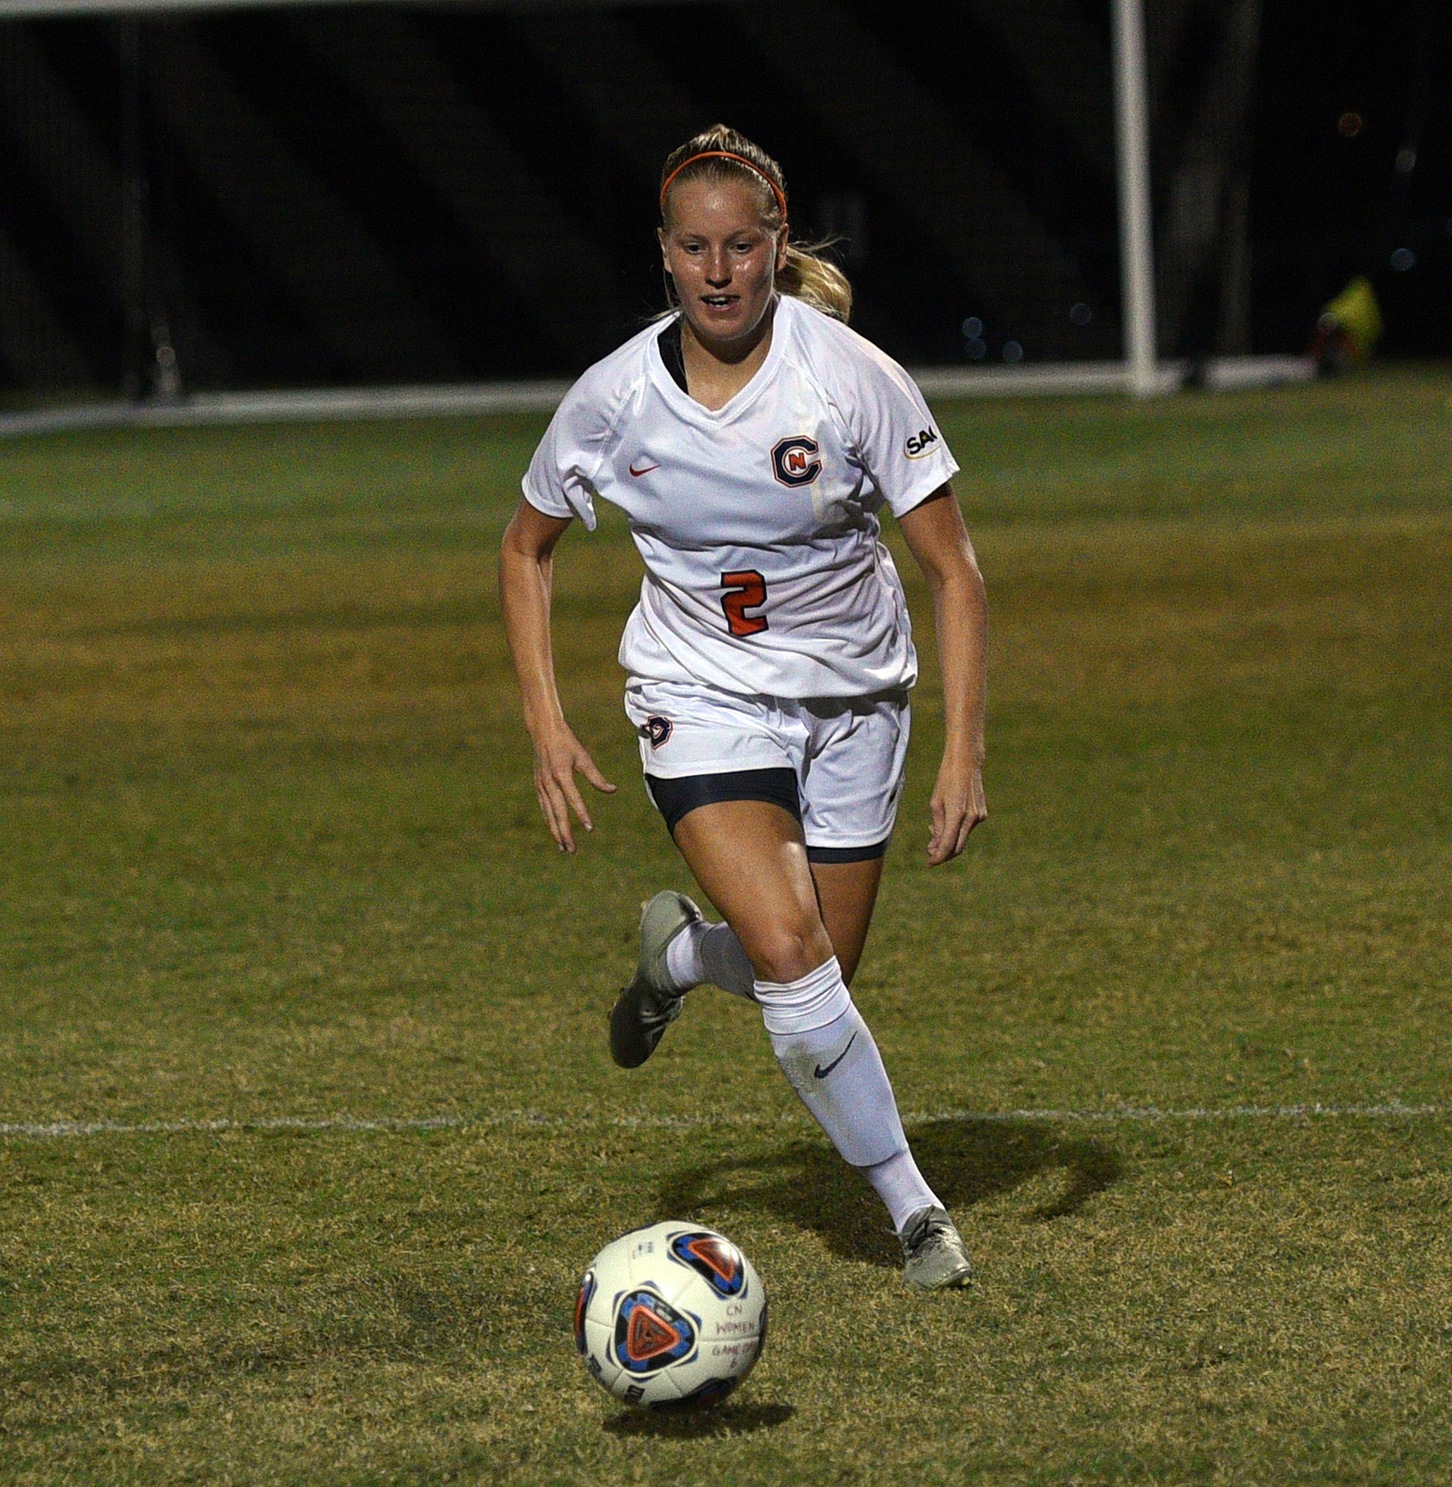 Eagles come up short against North Greenville in nonconference match